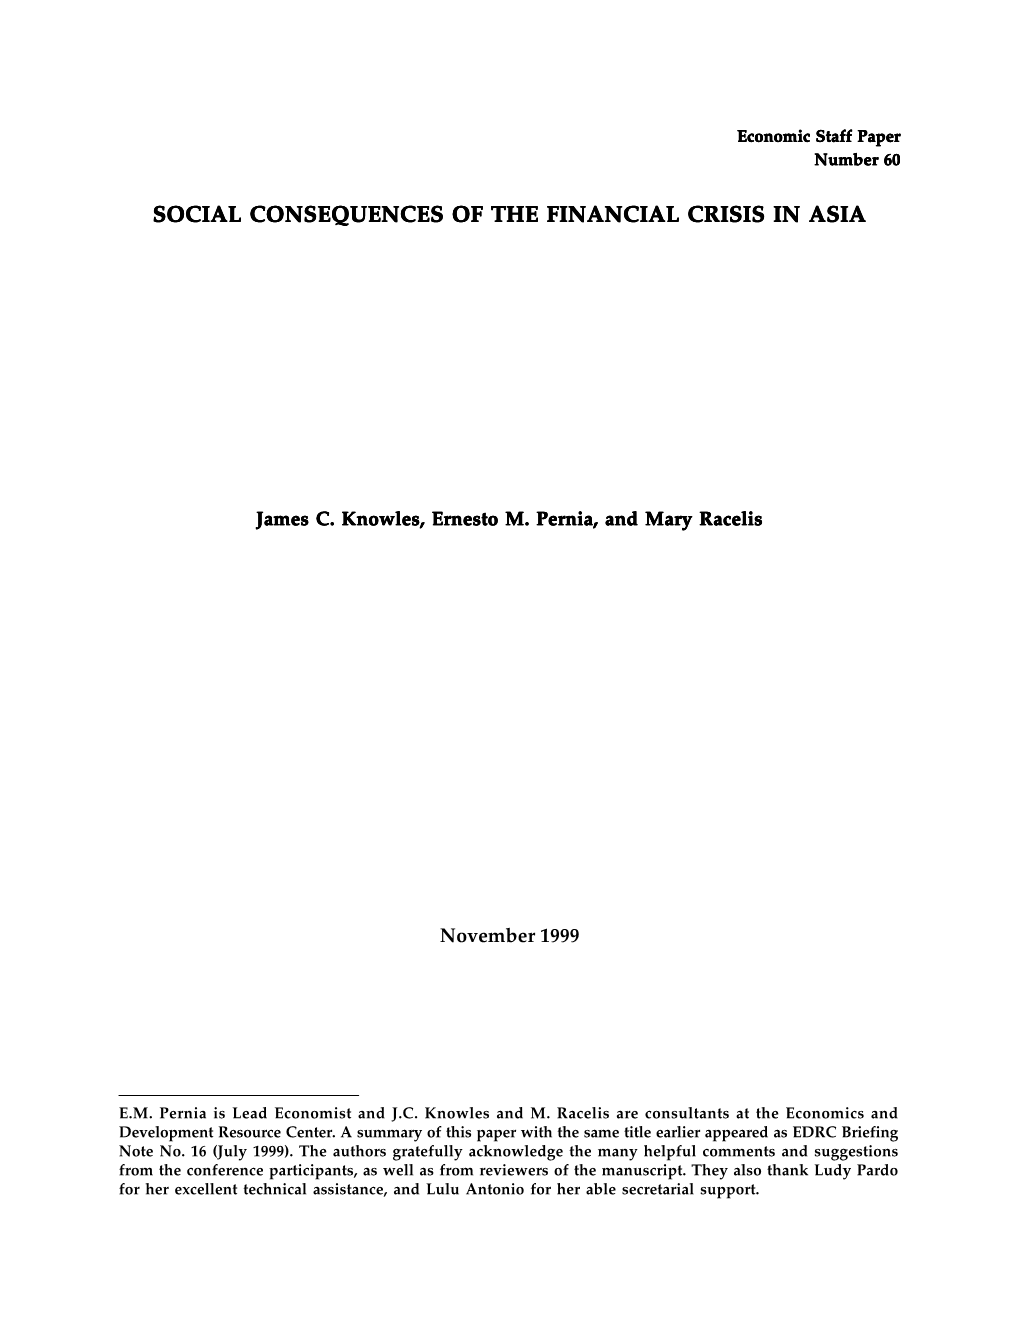 Social Consequences of the Financial Crisis in Asia